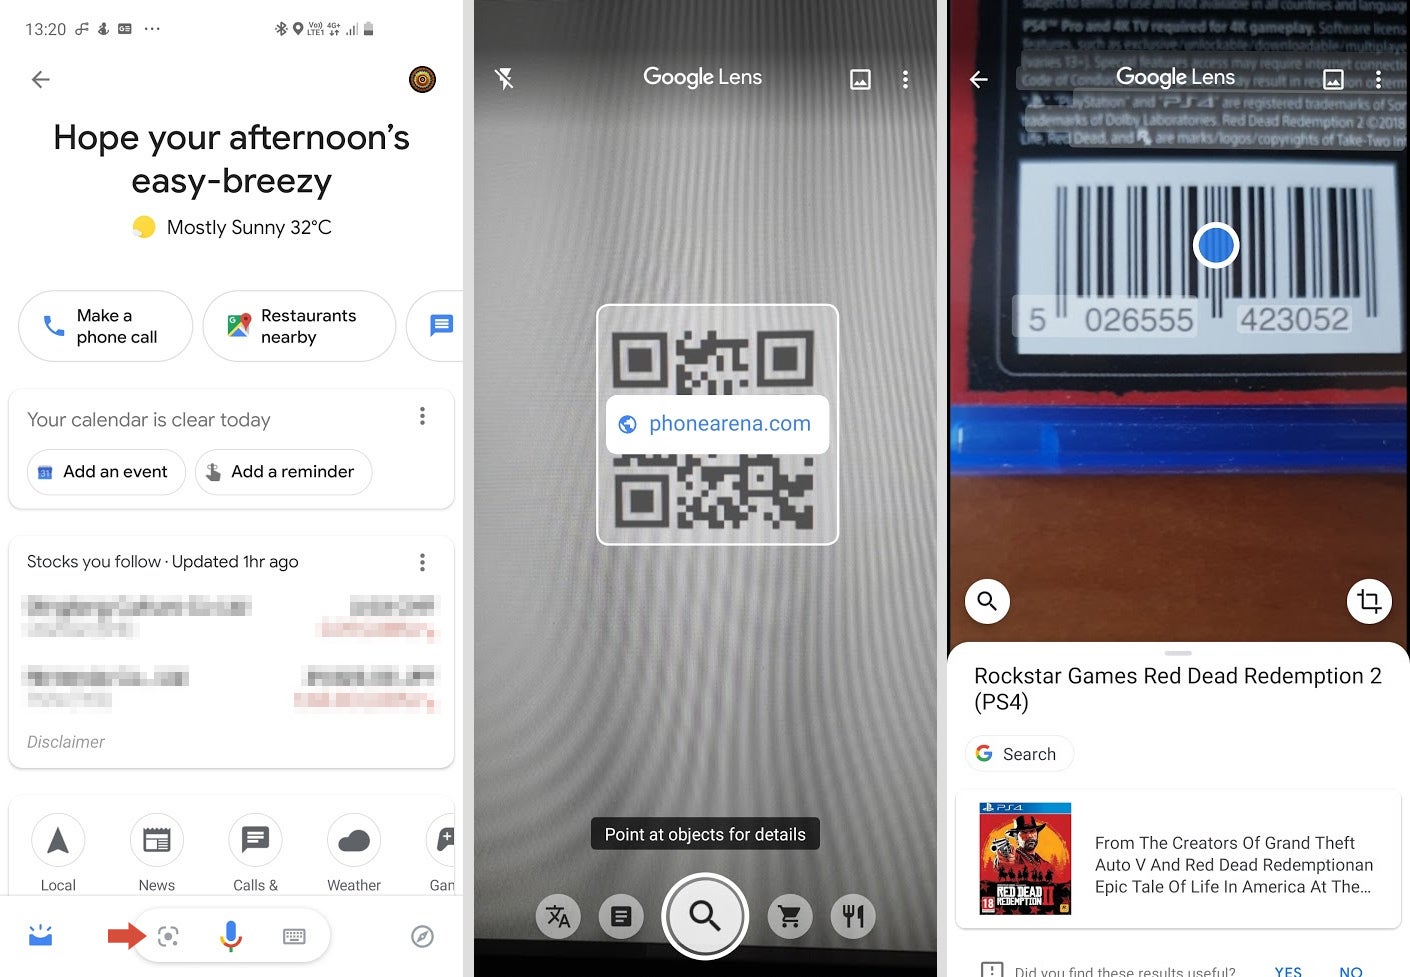 dispatch The above each other How to scan QR codes and barcodes on iPhone and Android - PhoneArena